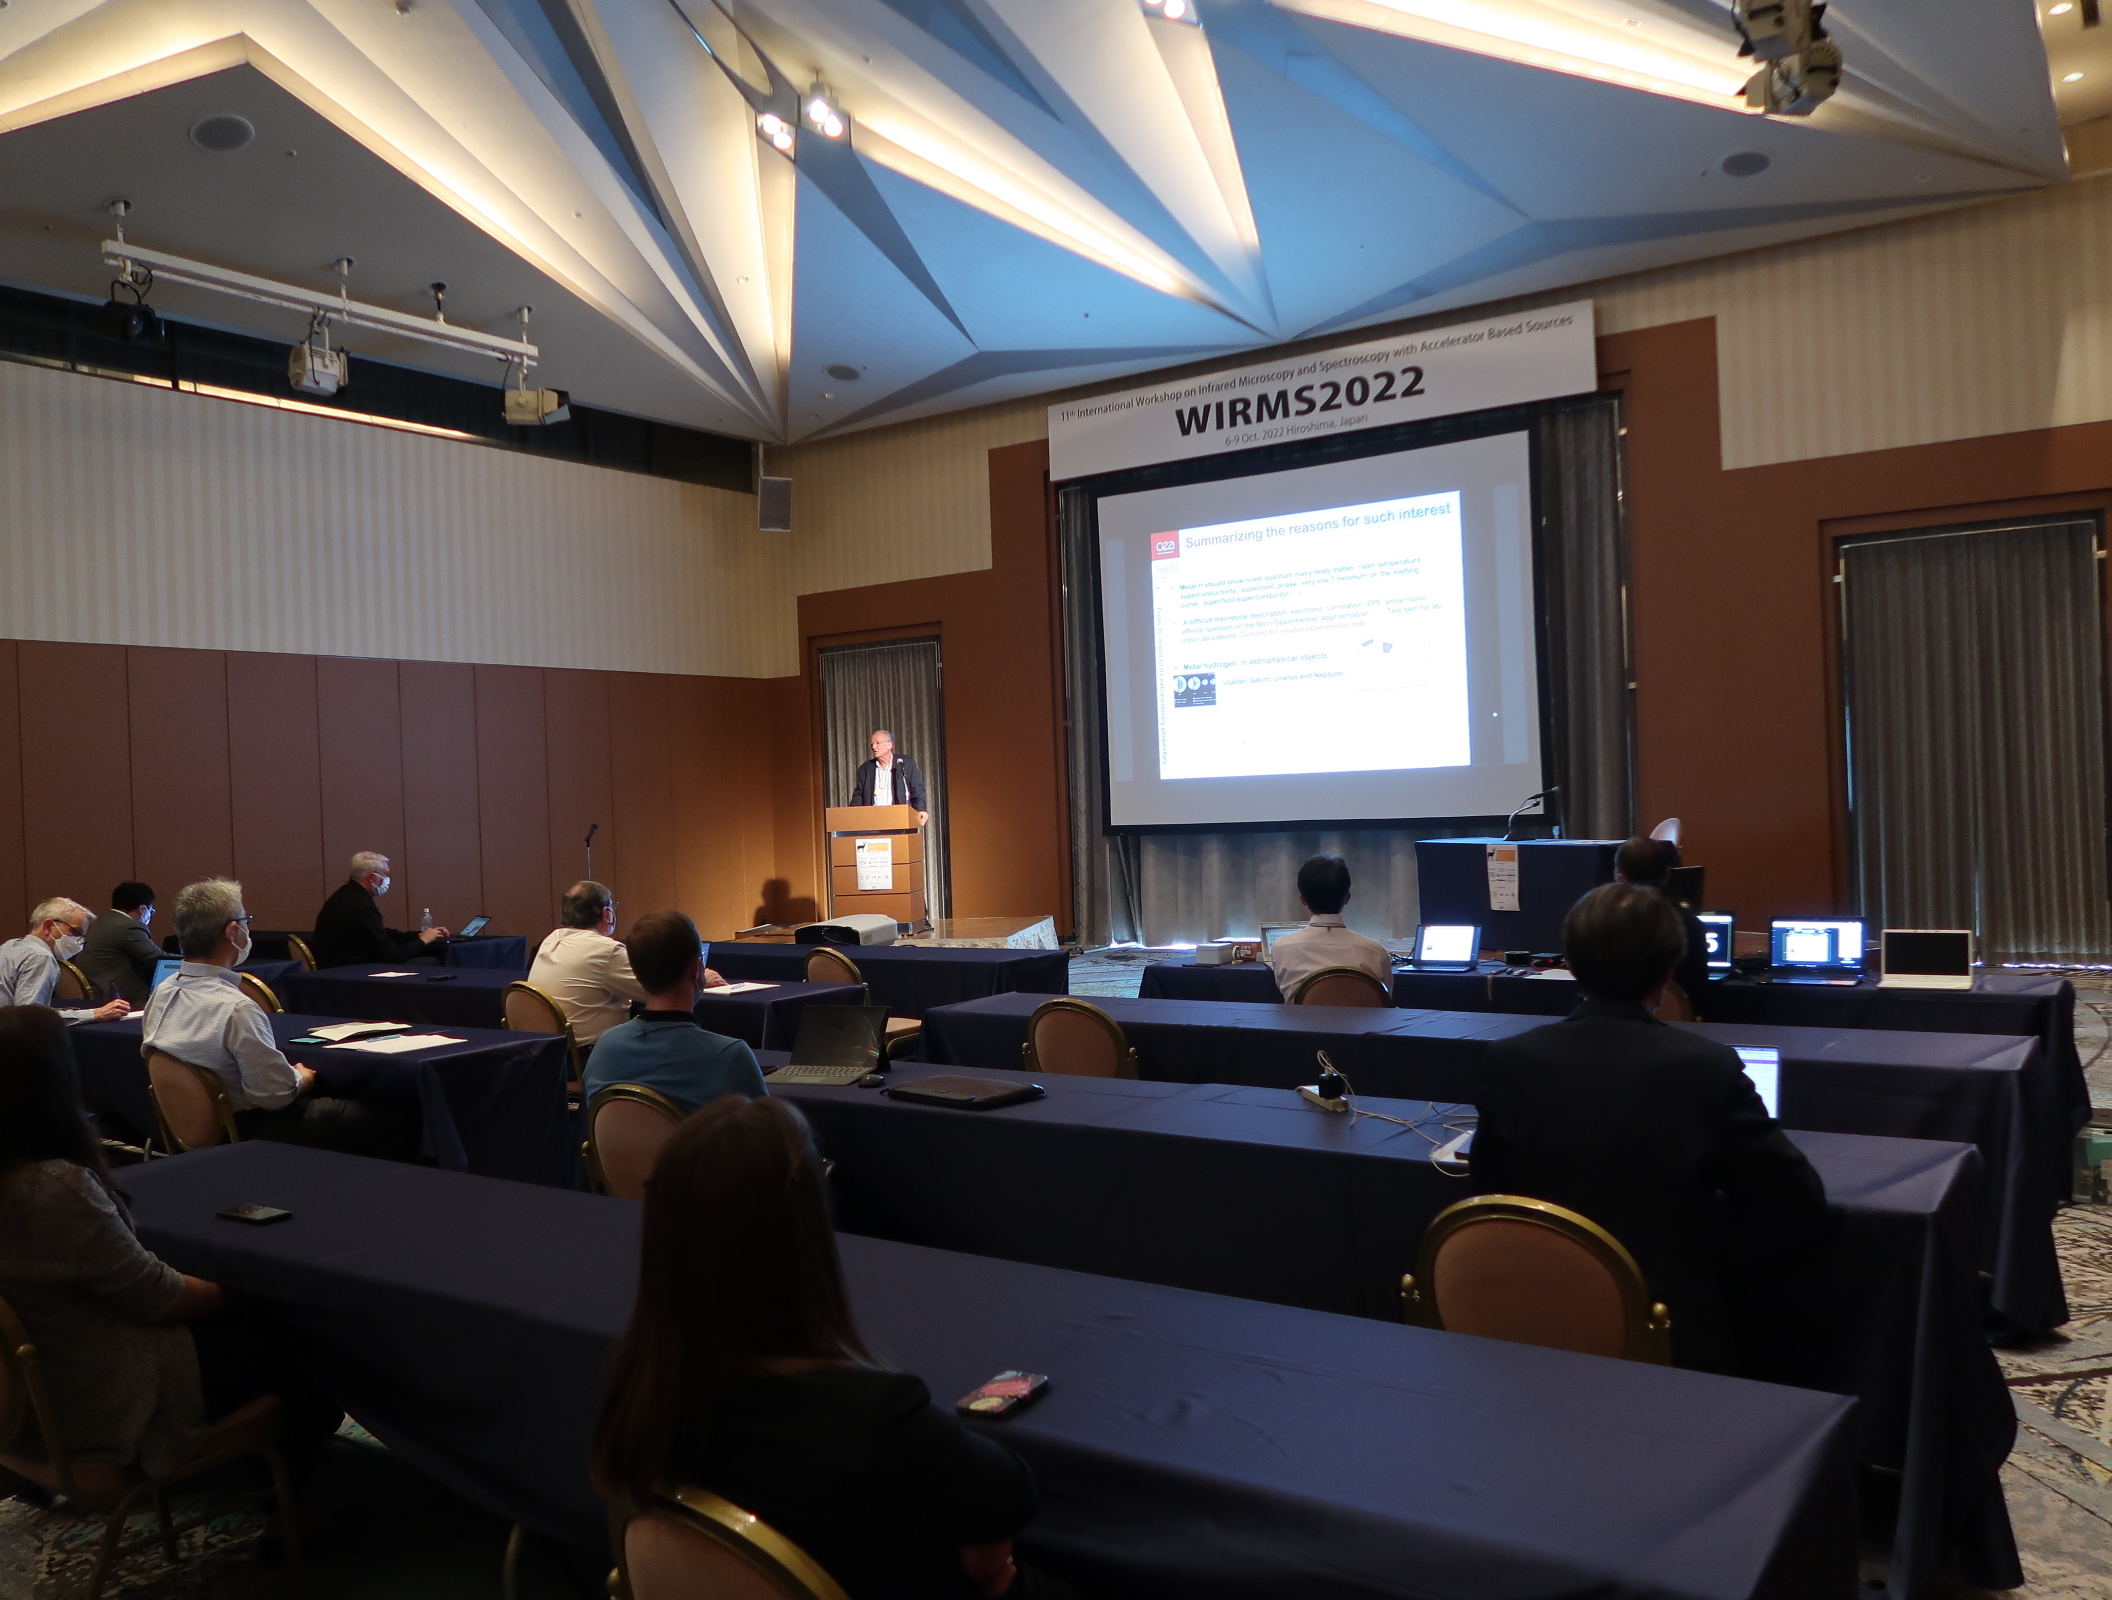 11th International Workshop on Infrared Microscopy and Spectroscopy with Accelerator Based Sources (WIRMS2022)組織委員会